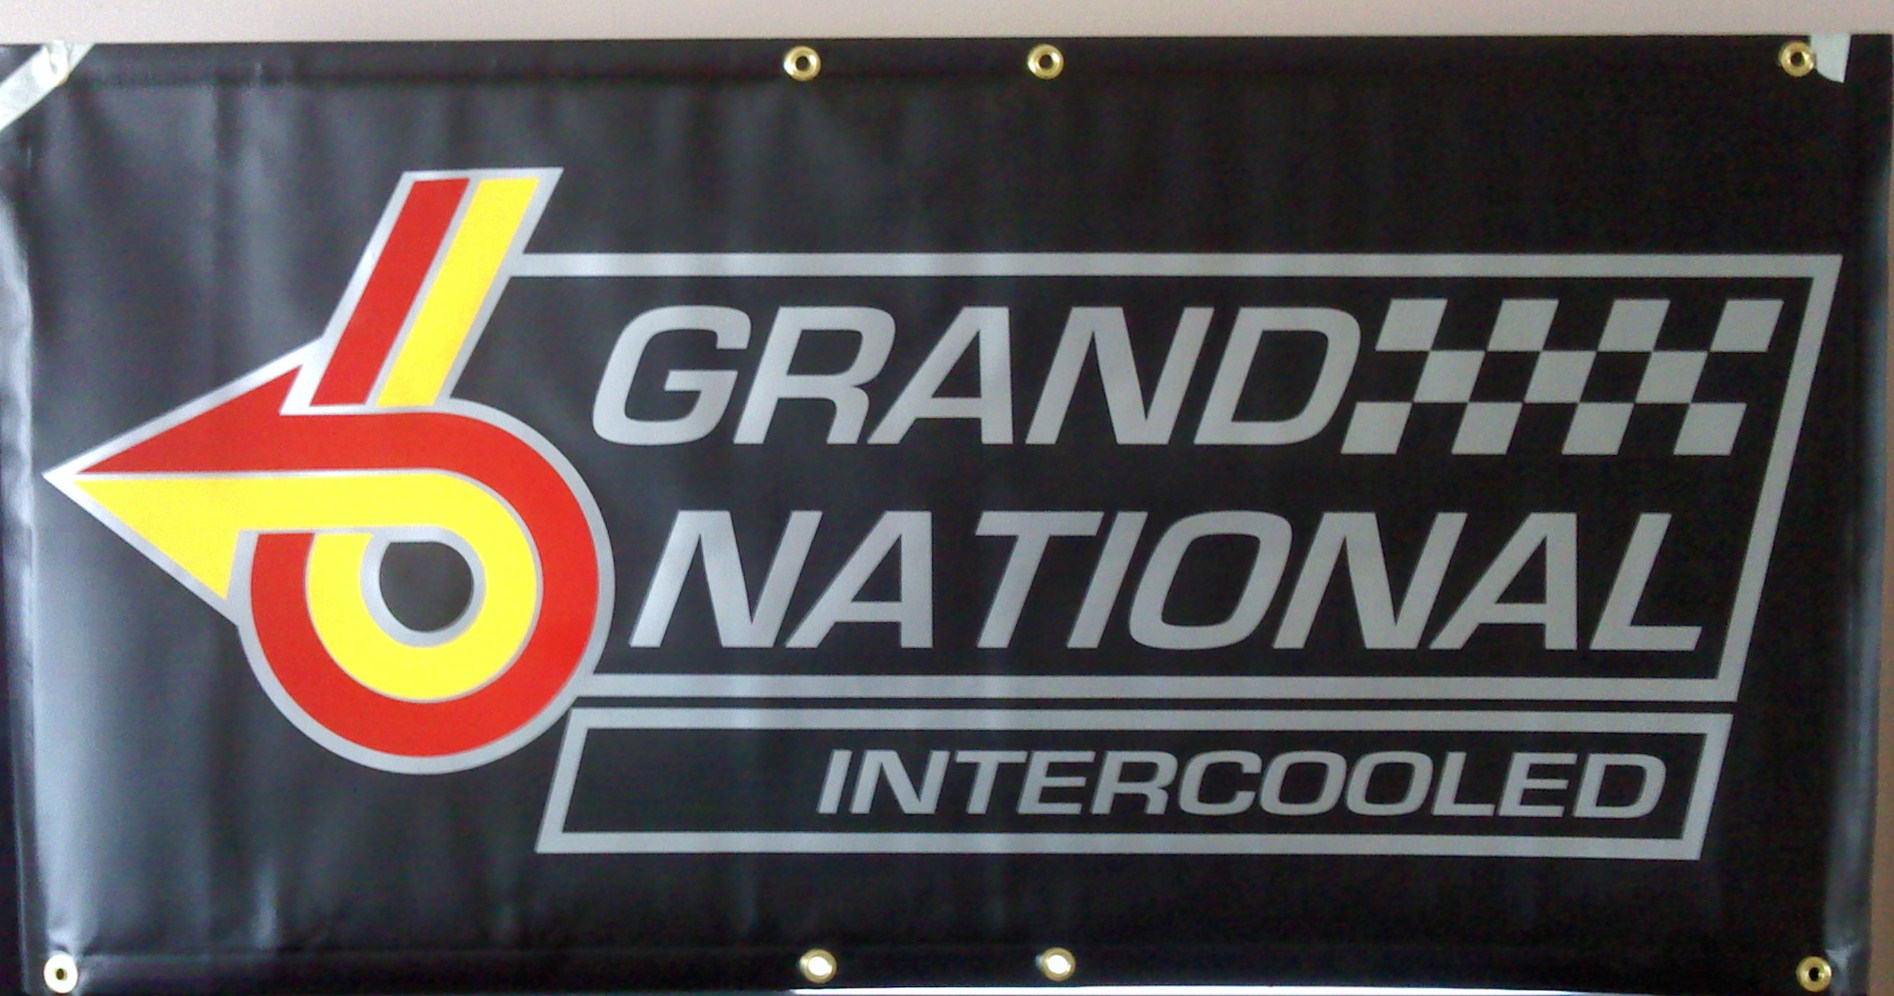 Grand National Intercooled 4 FT x 2 FT premium 13 oz vinyl banner, black with red and yellow lettering